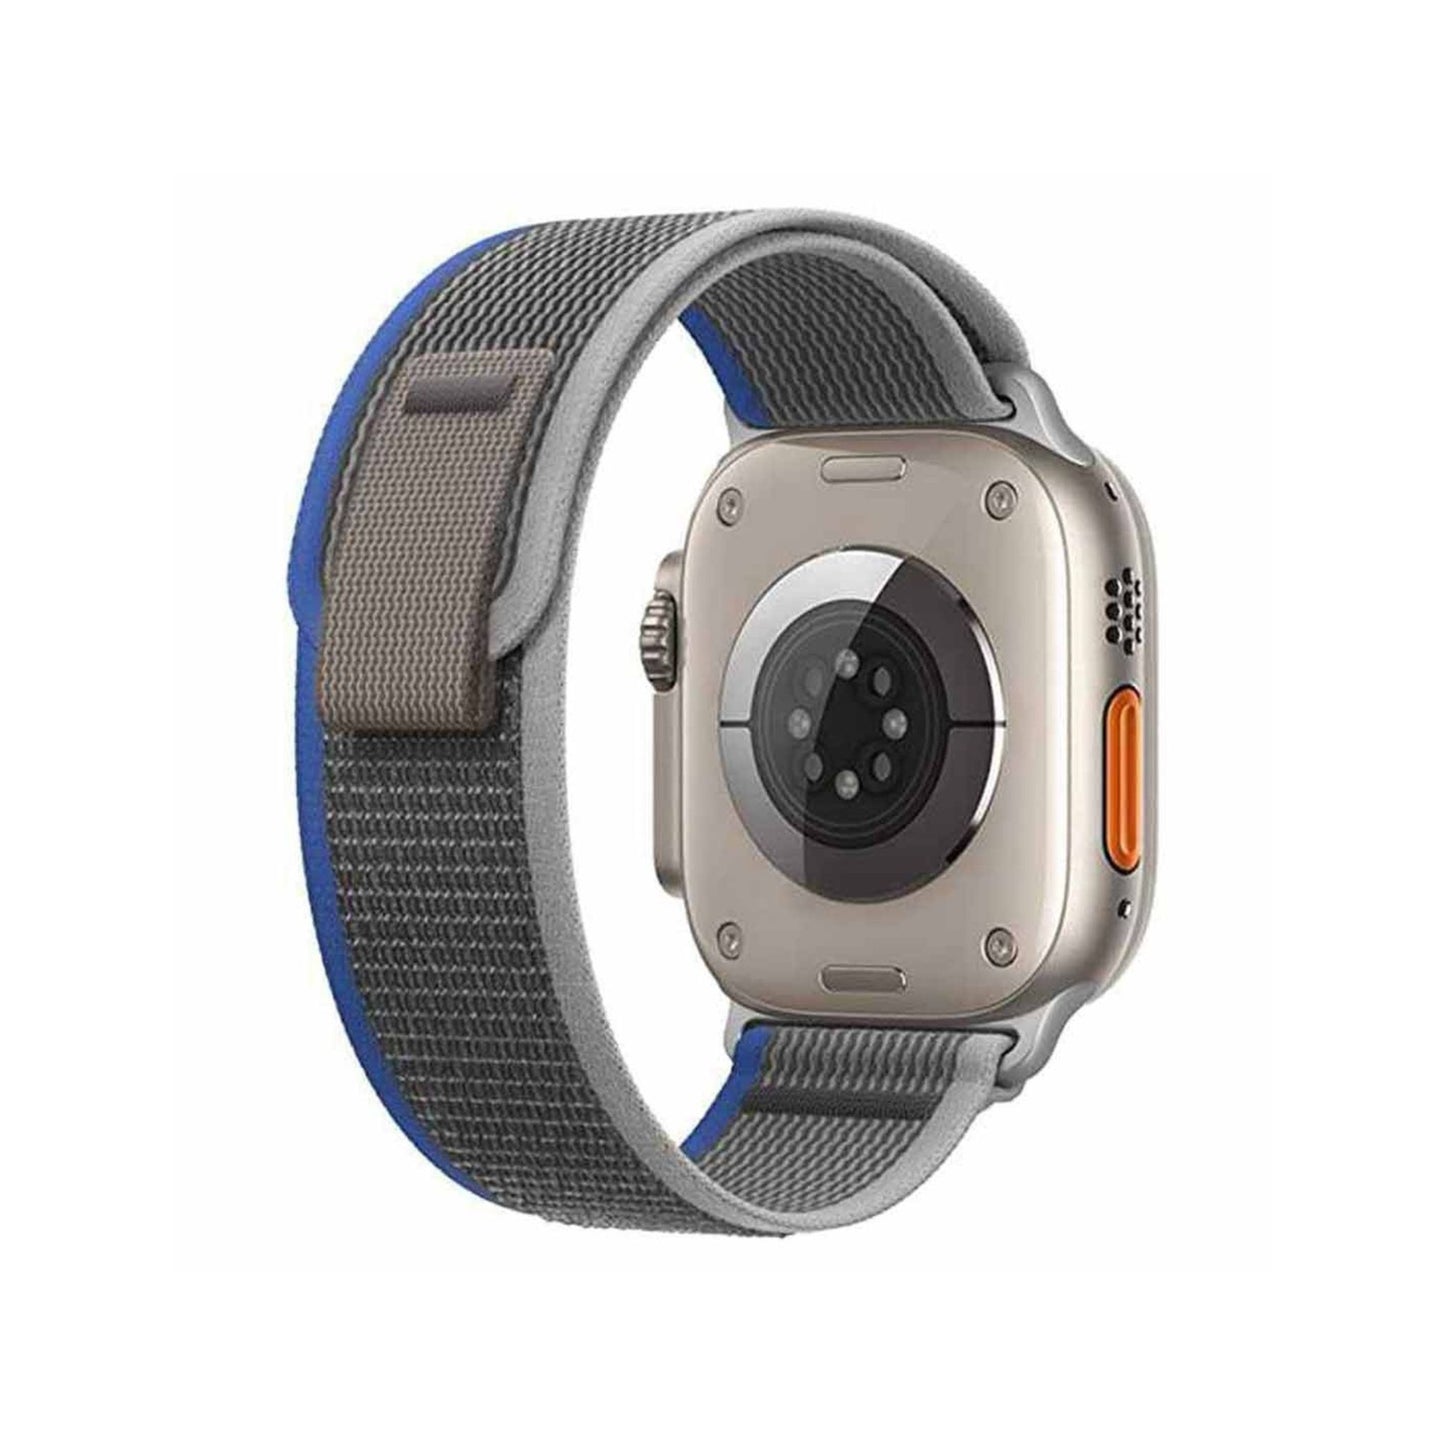 Green Lion Trail Loop Strap For iWatch_Gray/Blue